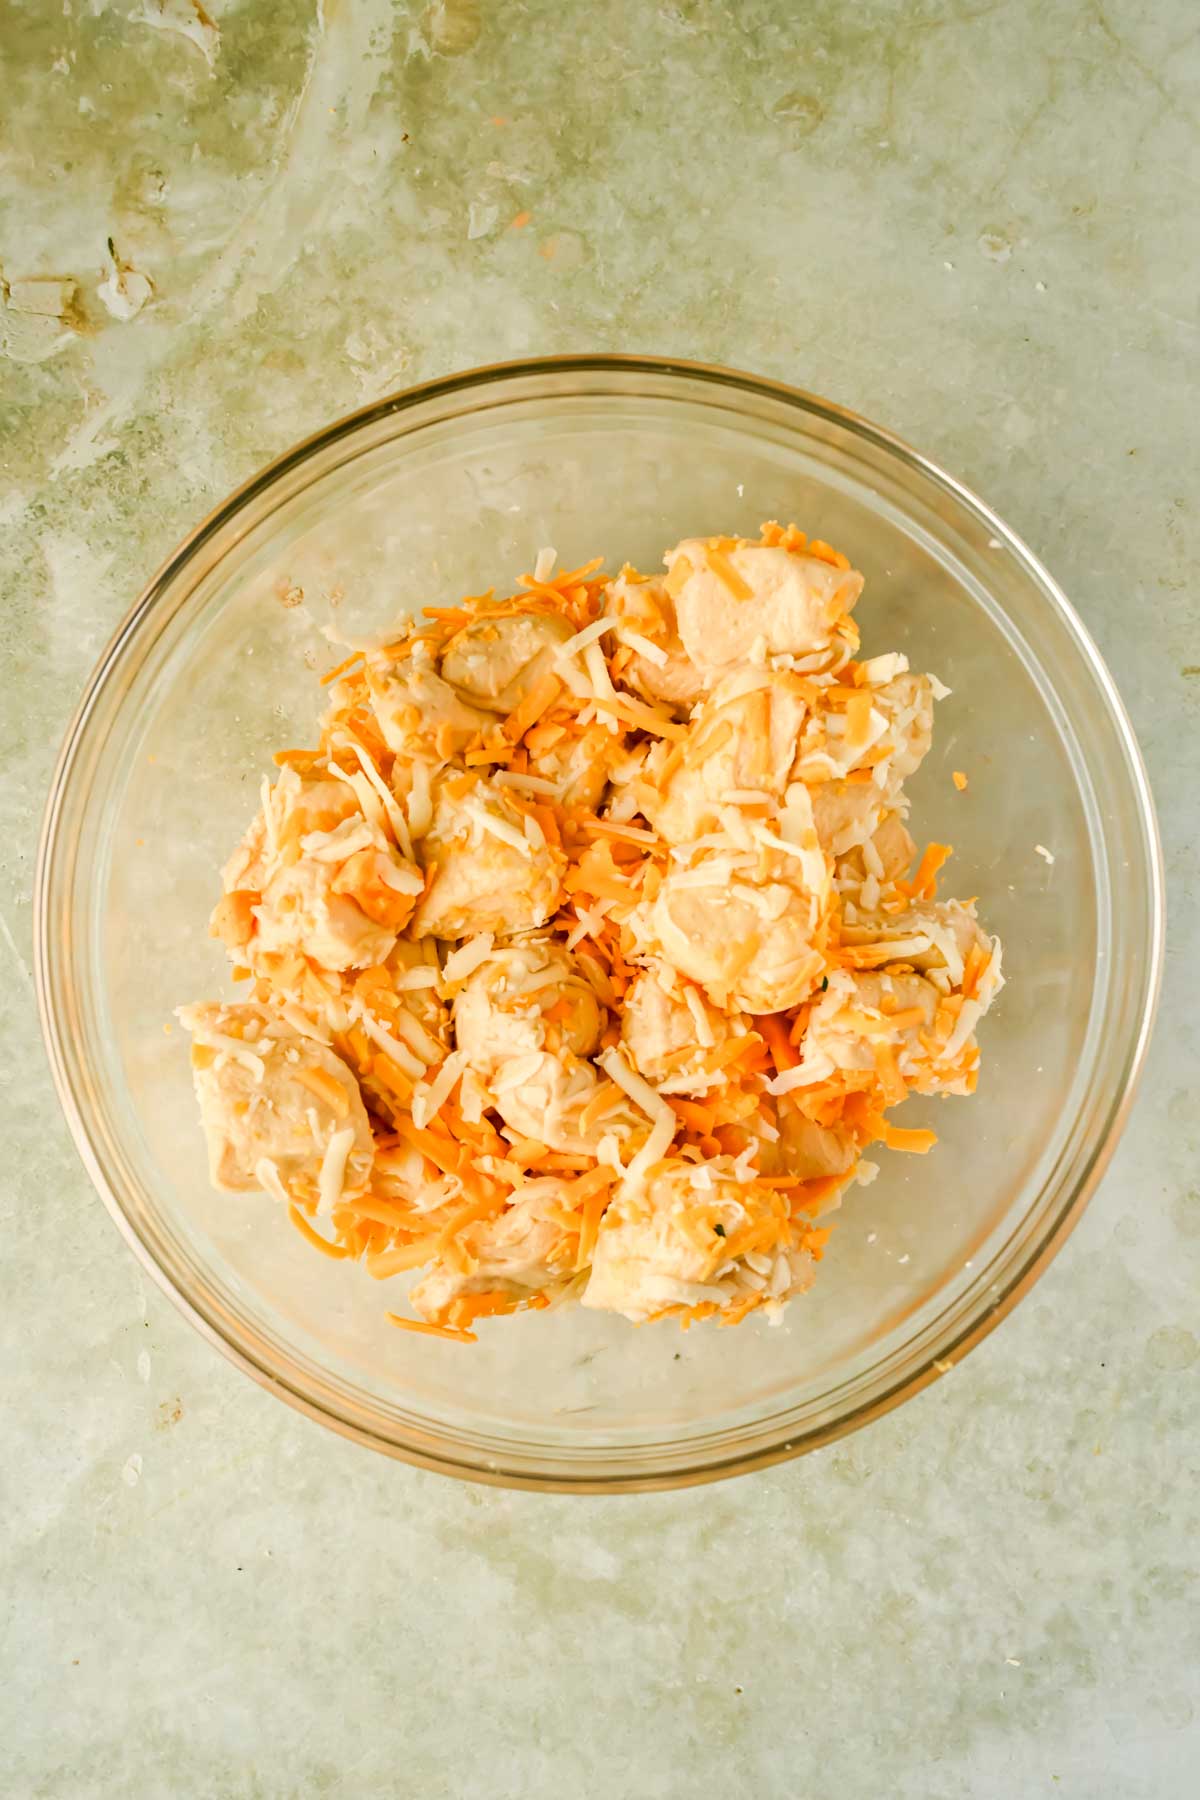 raw biscuit pieces with shredded cheese in glass mixing bowl.